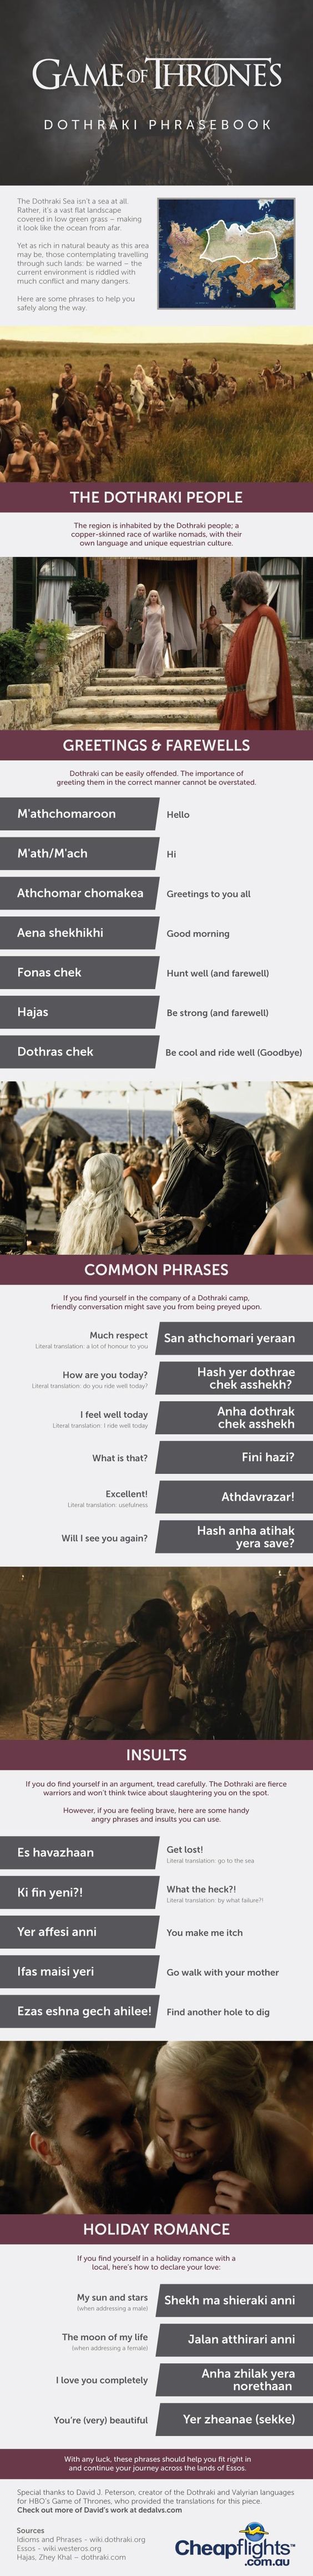 This language guide is a must have for those looking to cross the Dothraki Sea. #GameOfThrones